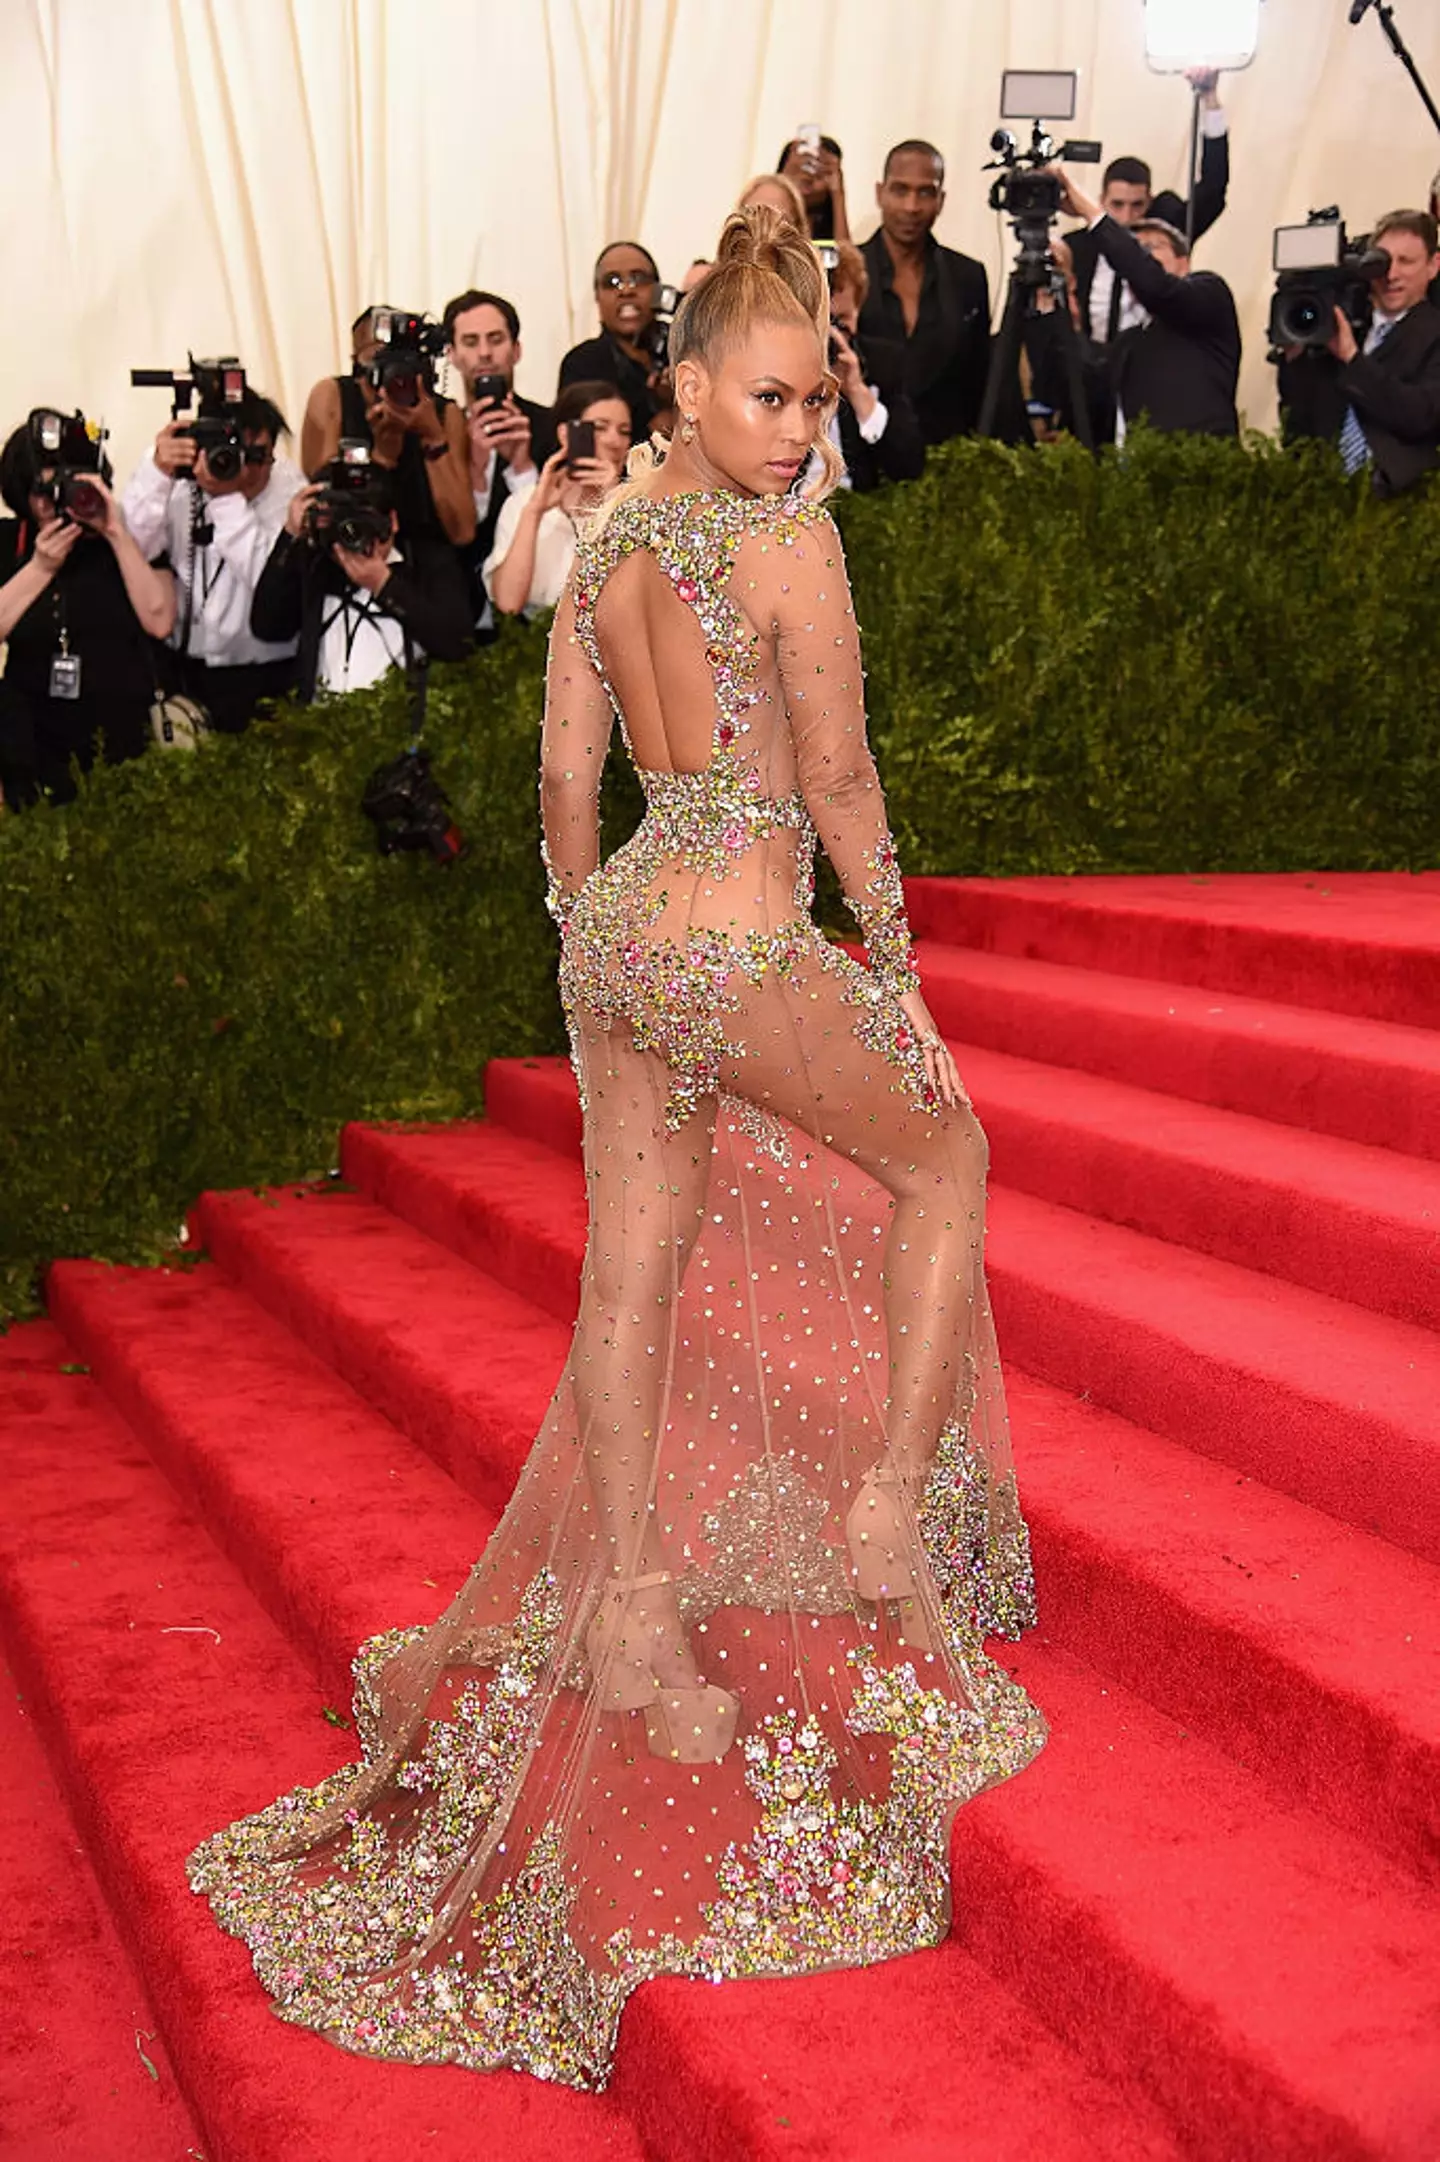 Beyoncé wearing her iconic 'naked' Givenchy dress at the 2015 Met Gala. (Dimitrios Kambouris/Getty Images)